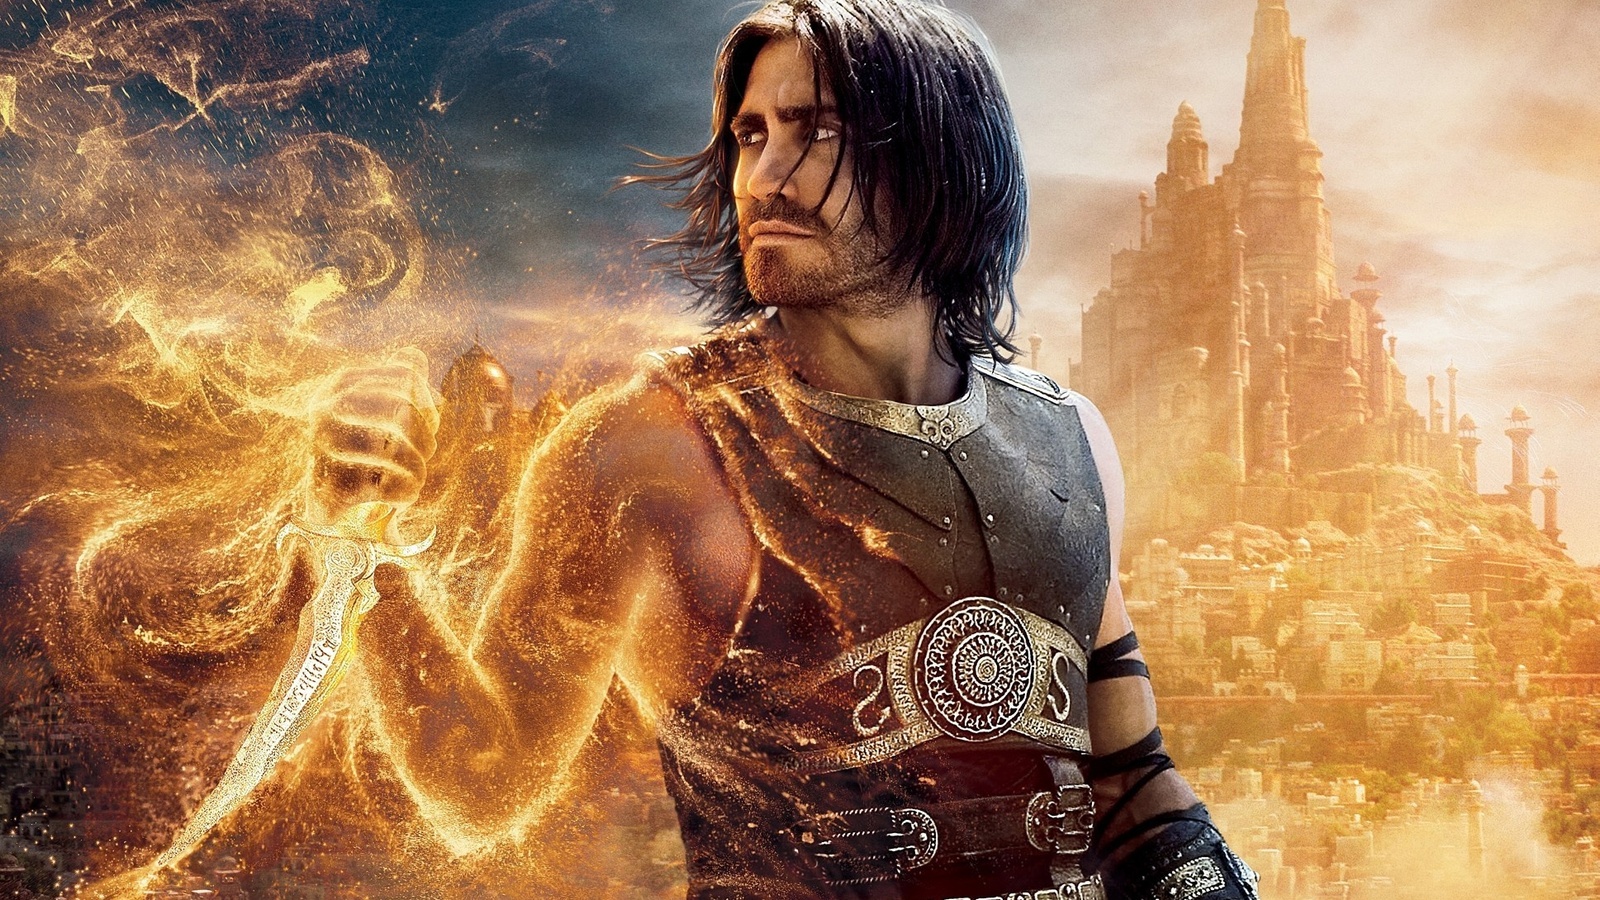 the movie,  ,  , the sands of time, Prince of persia